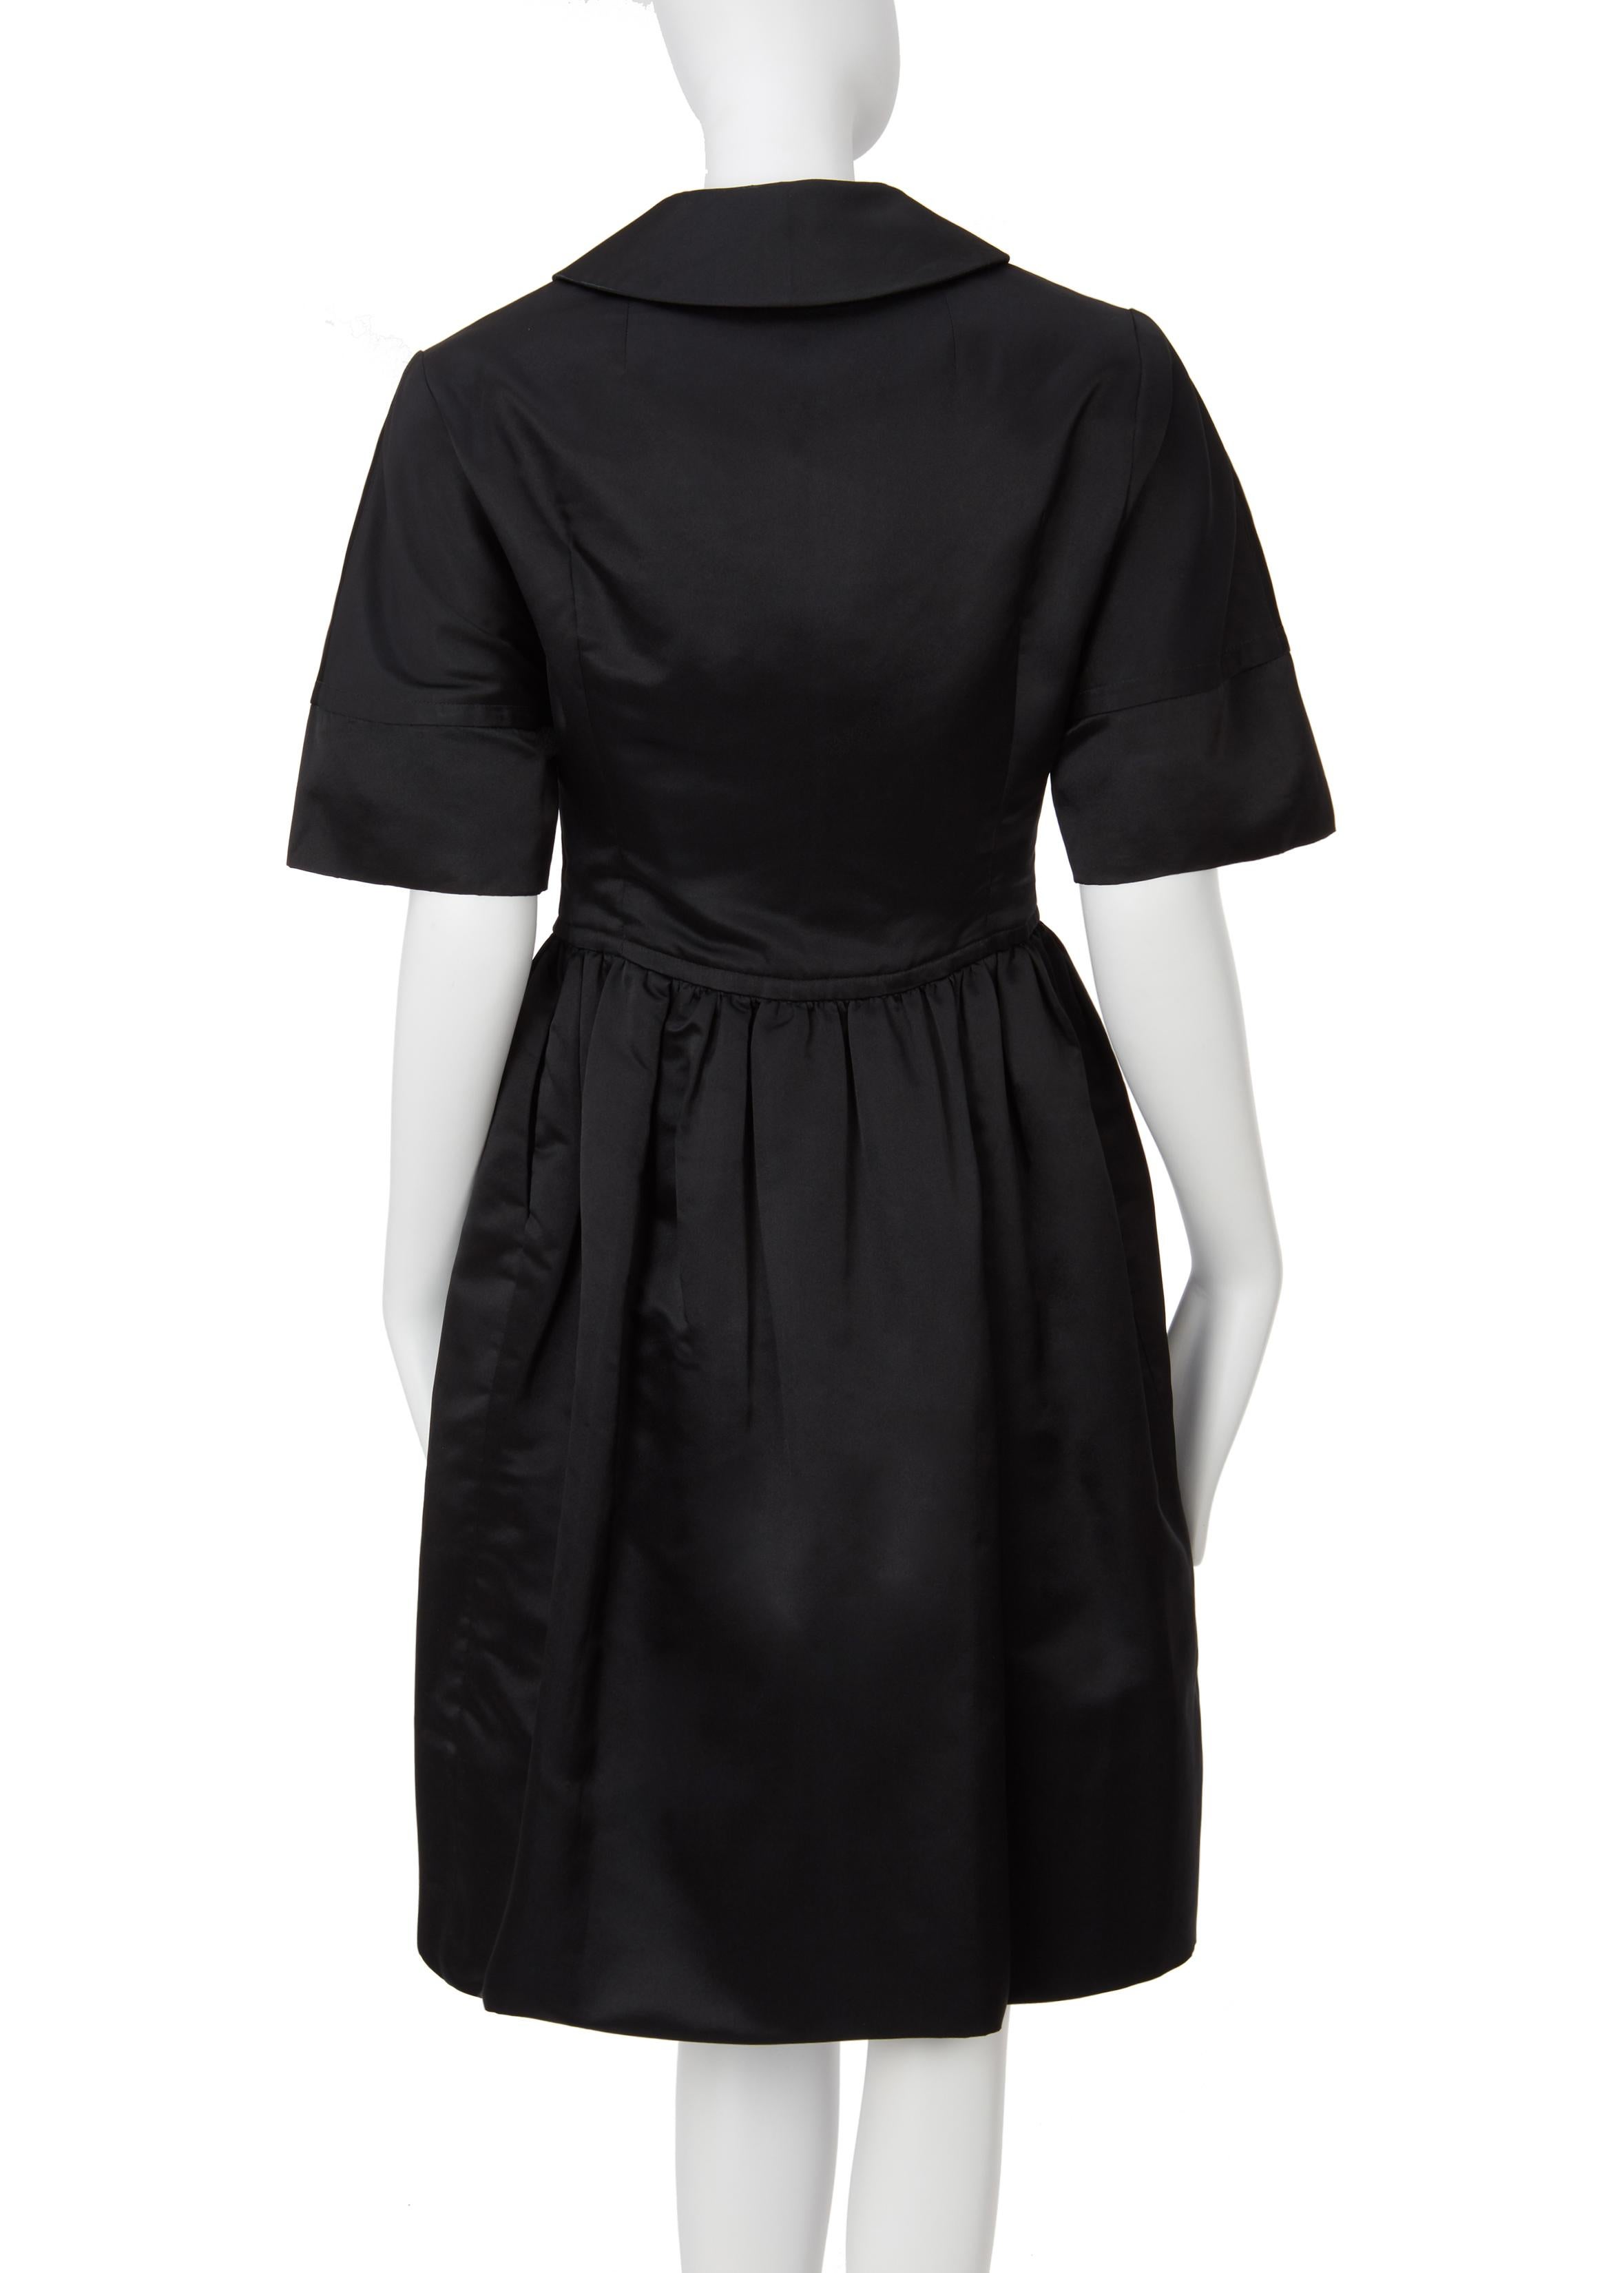 Unlabelled Dior black cocktail dress, circa 1956 In Excellent Condition For Sale In London, GB